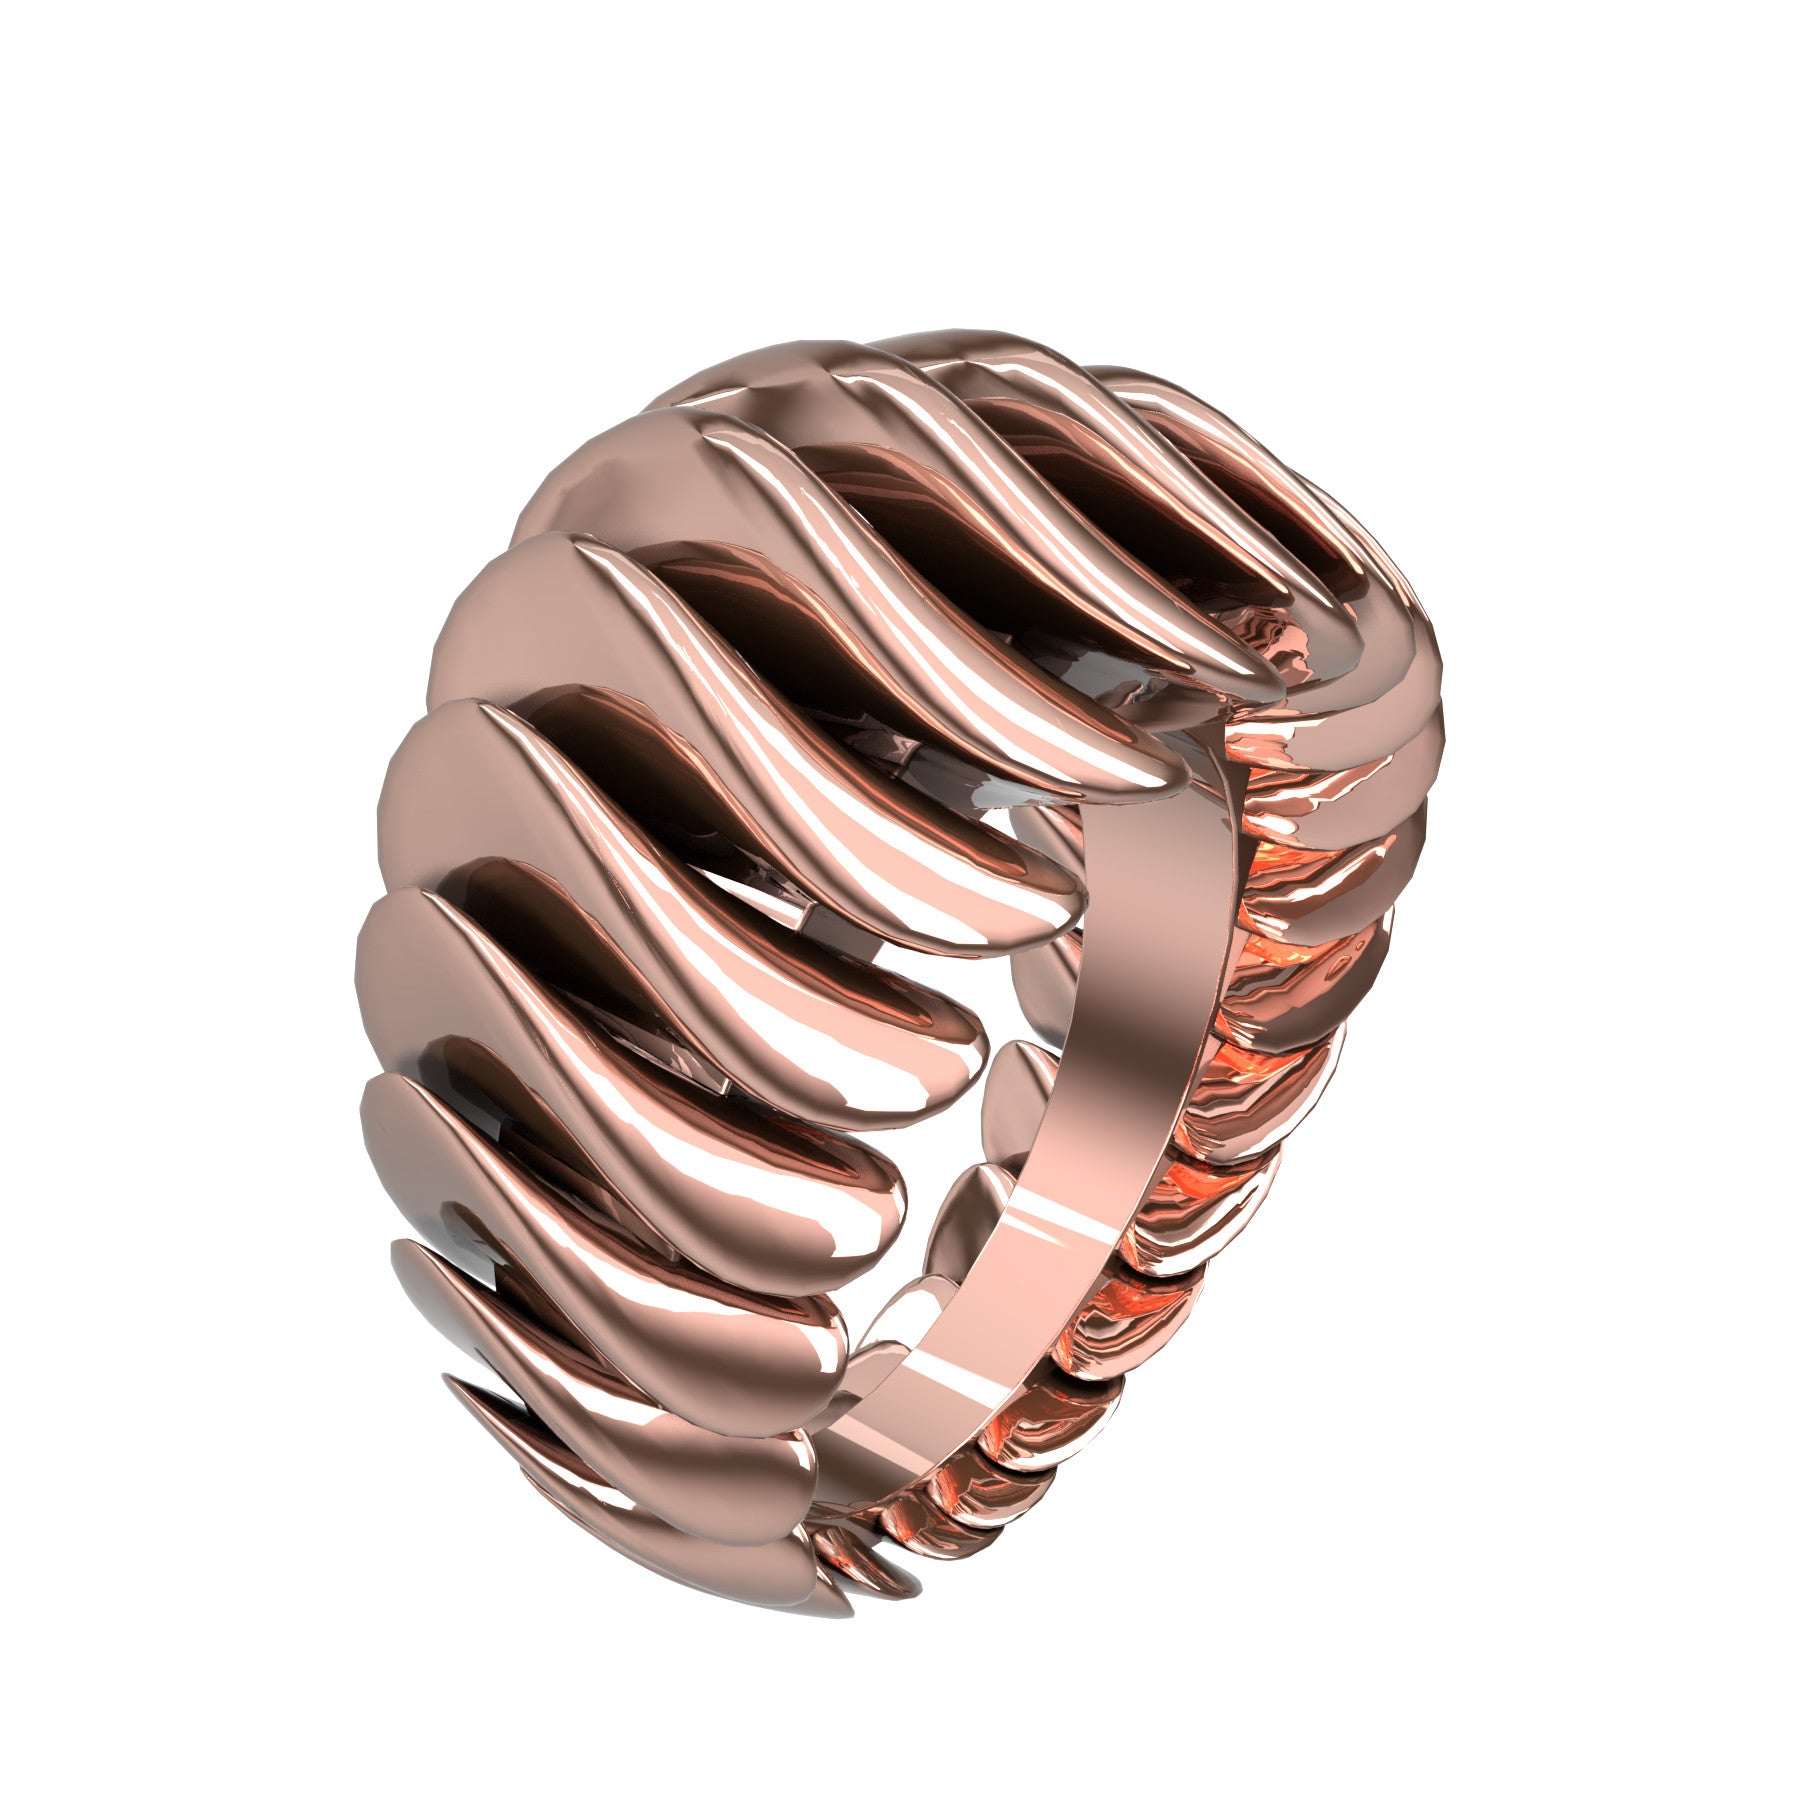 curvy ring, 18 K pink gold, weight about 20,3 g. (0.71 oz), width 14,6 mm max